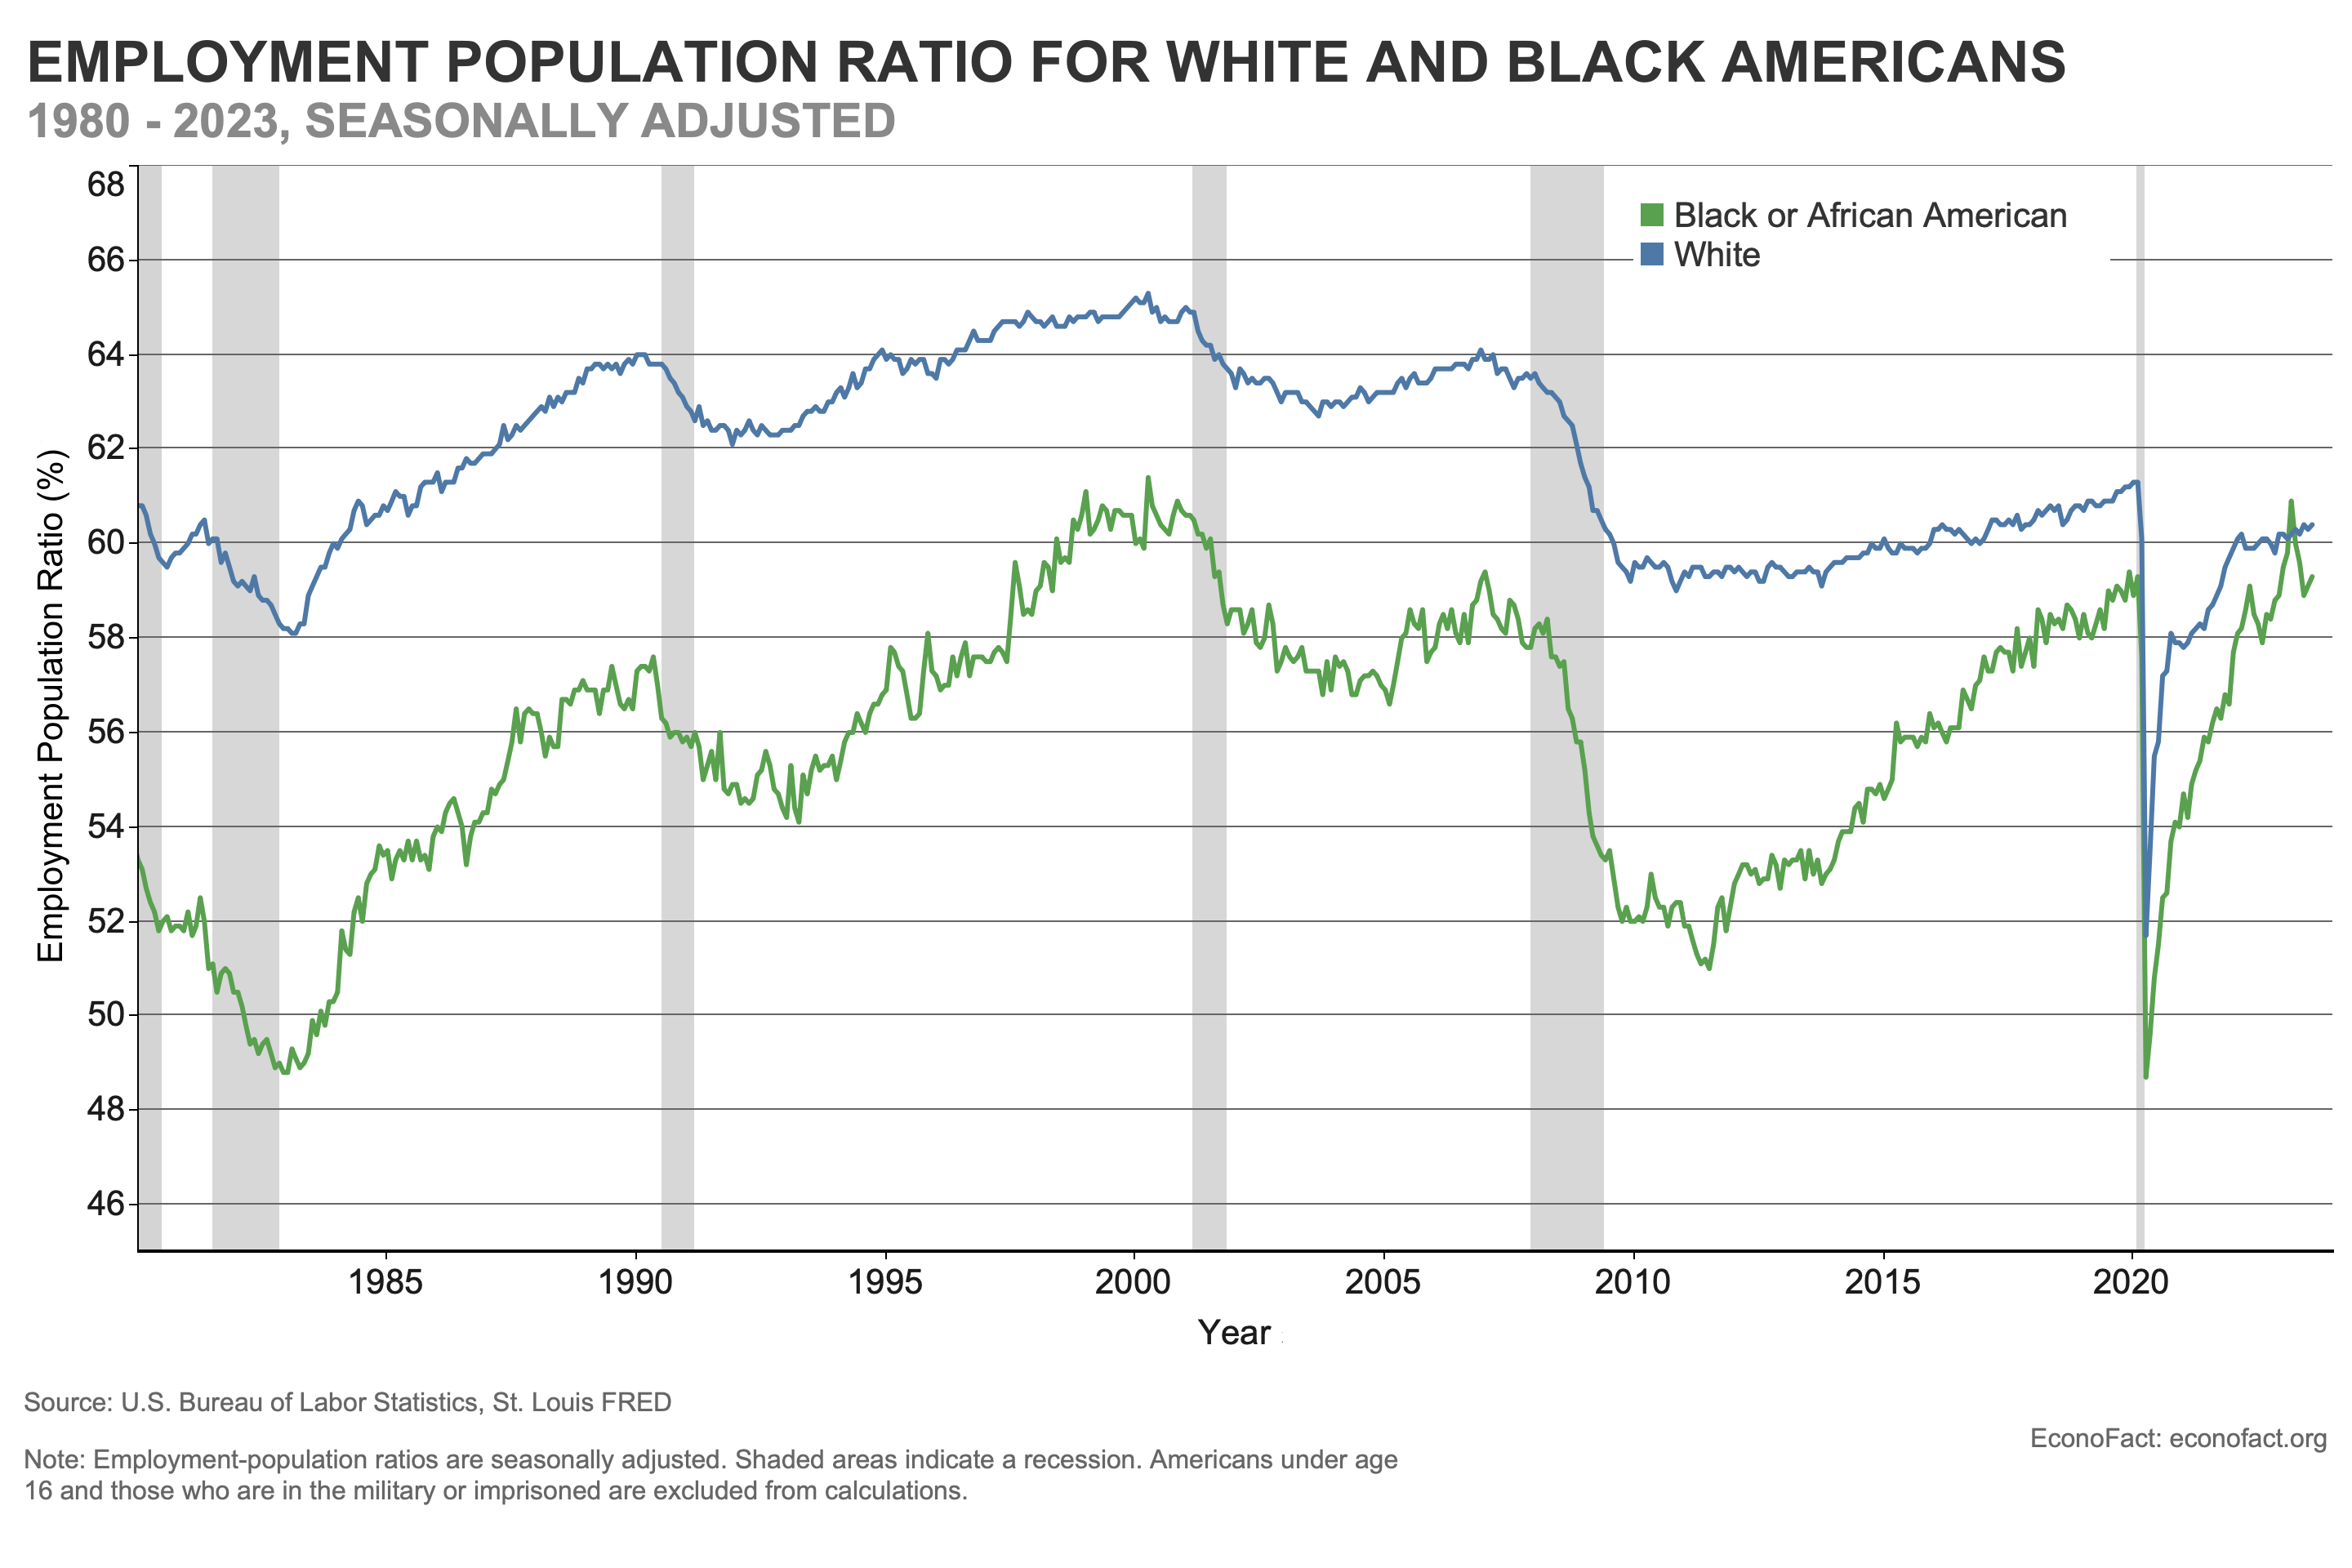 Is Black Employment Catching Up with White Employment?